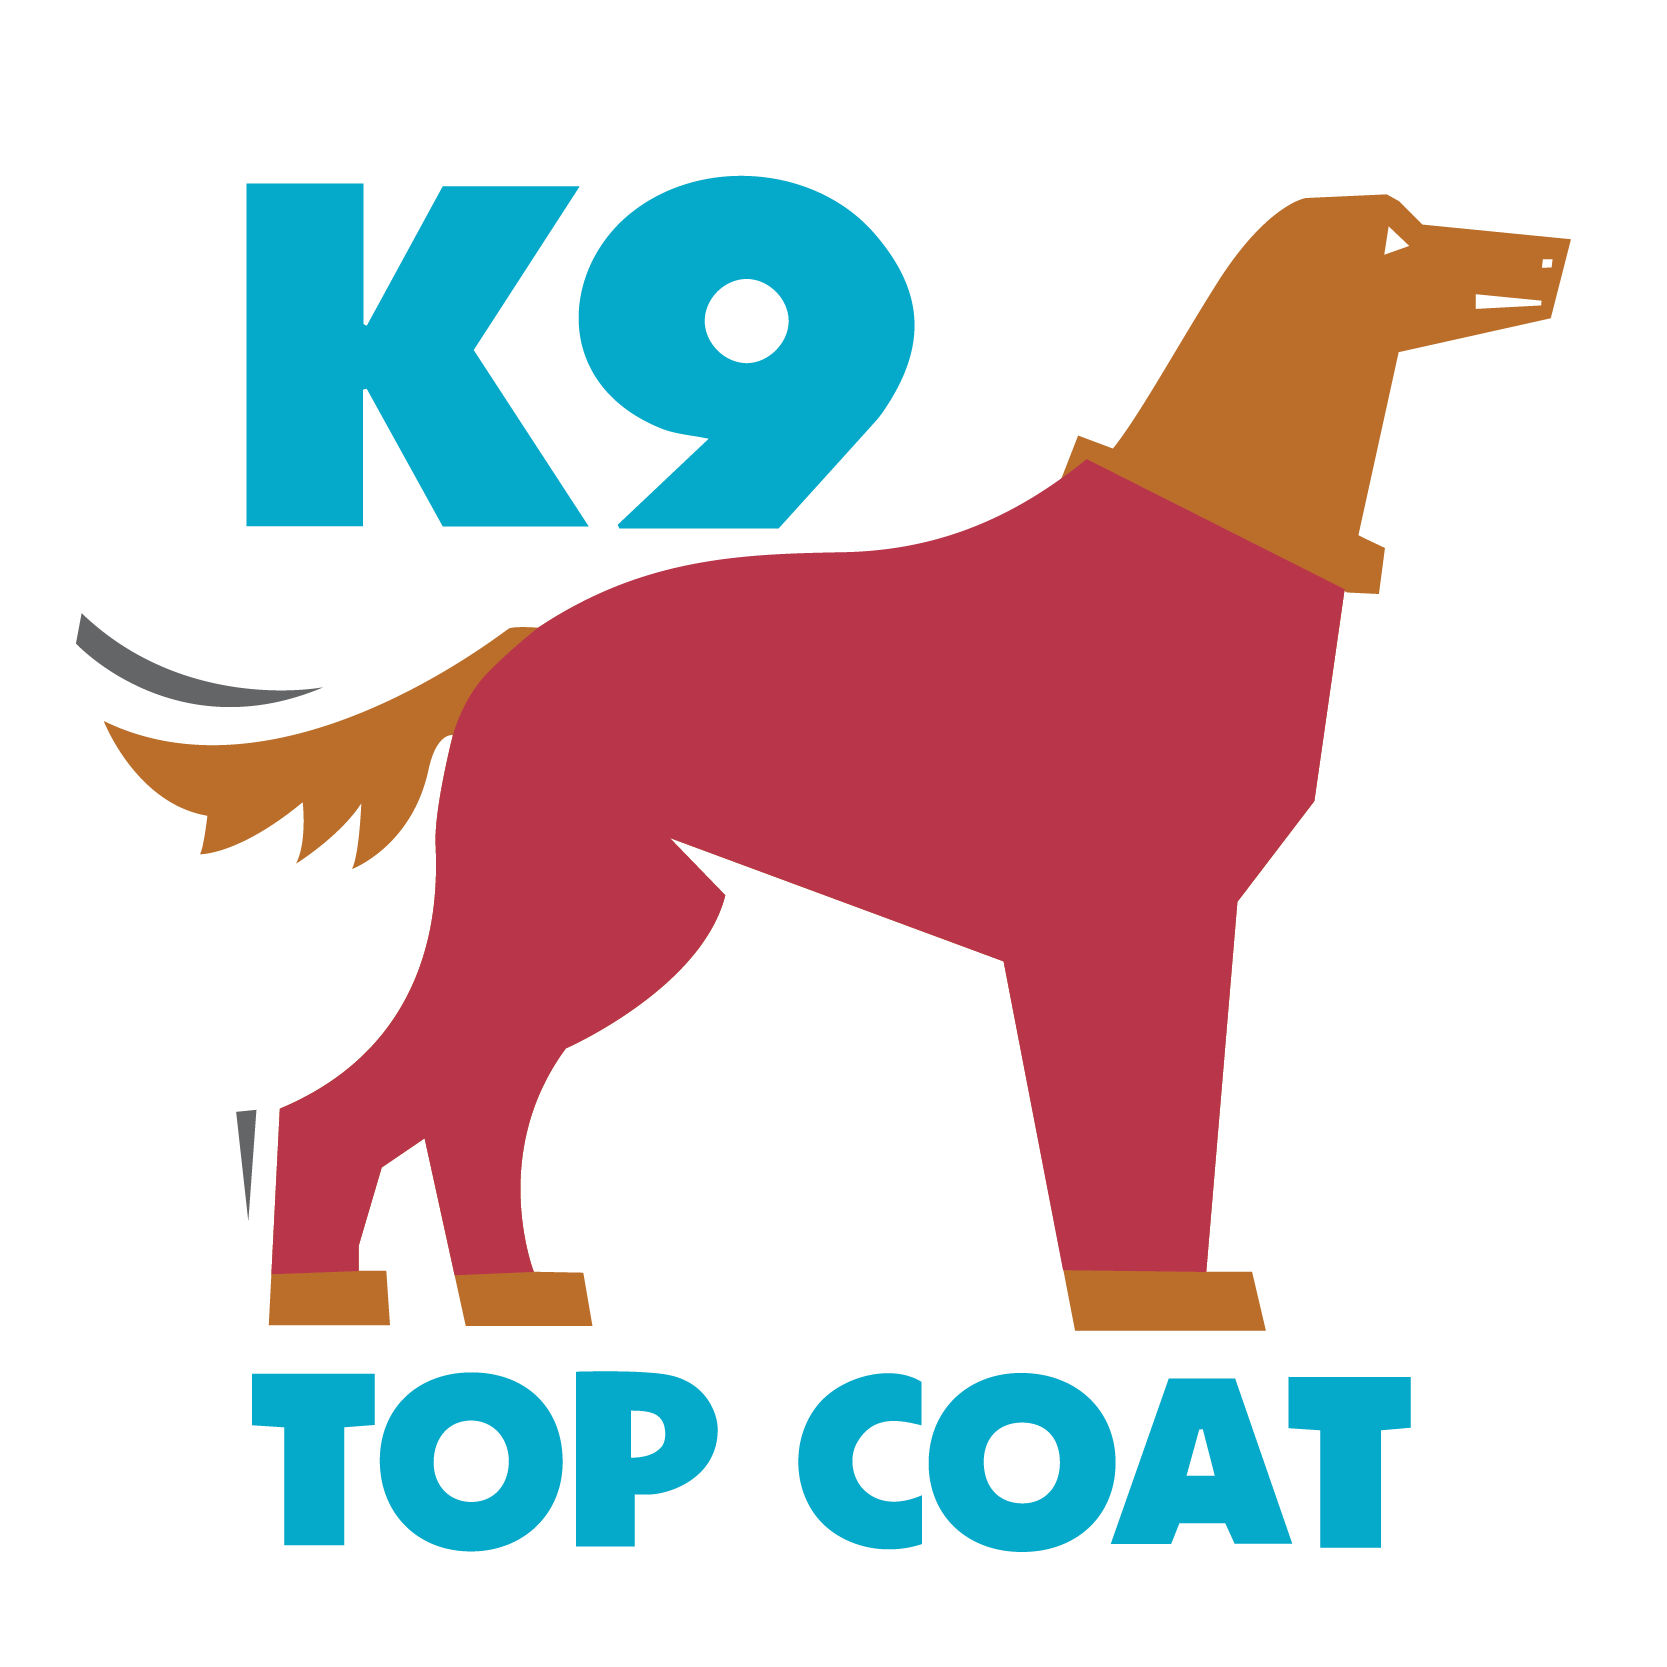 comfort coat for dogs